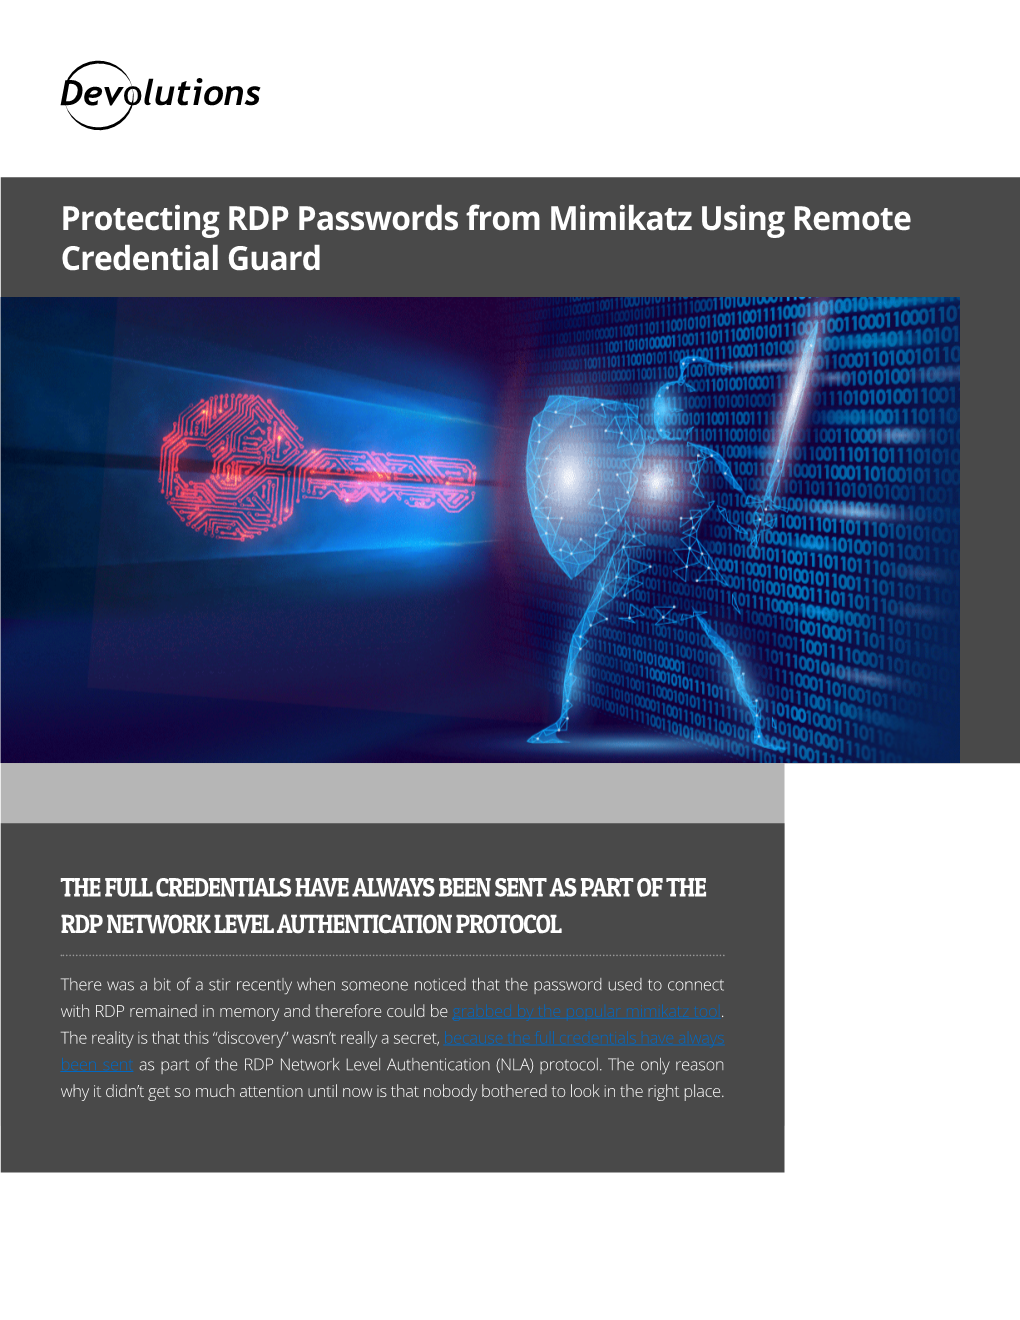 Protecting RDP Passwords from Mimikatz Using Remote Credential Guard